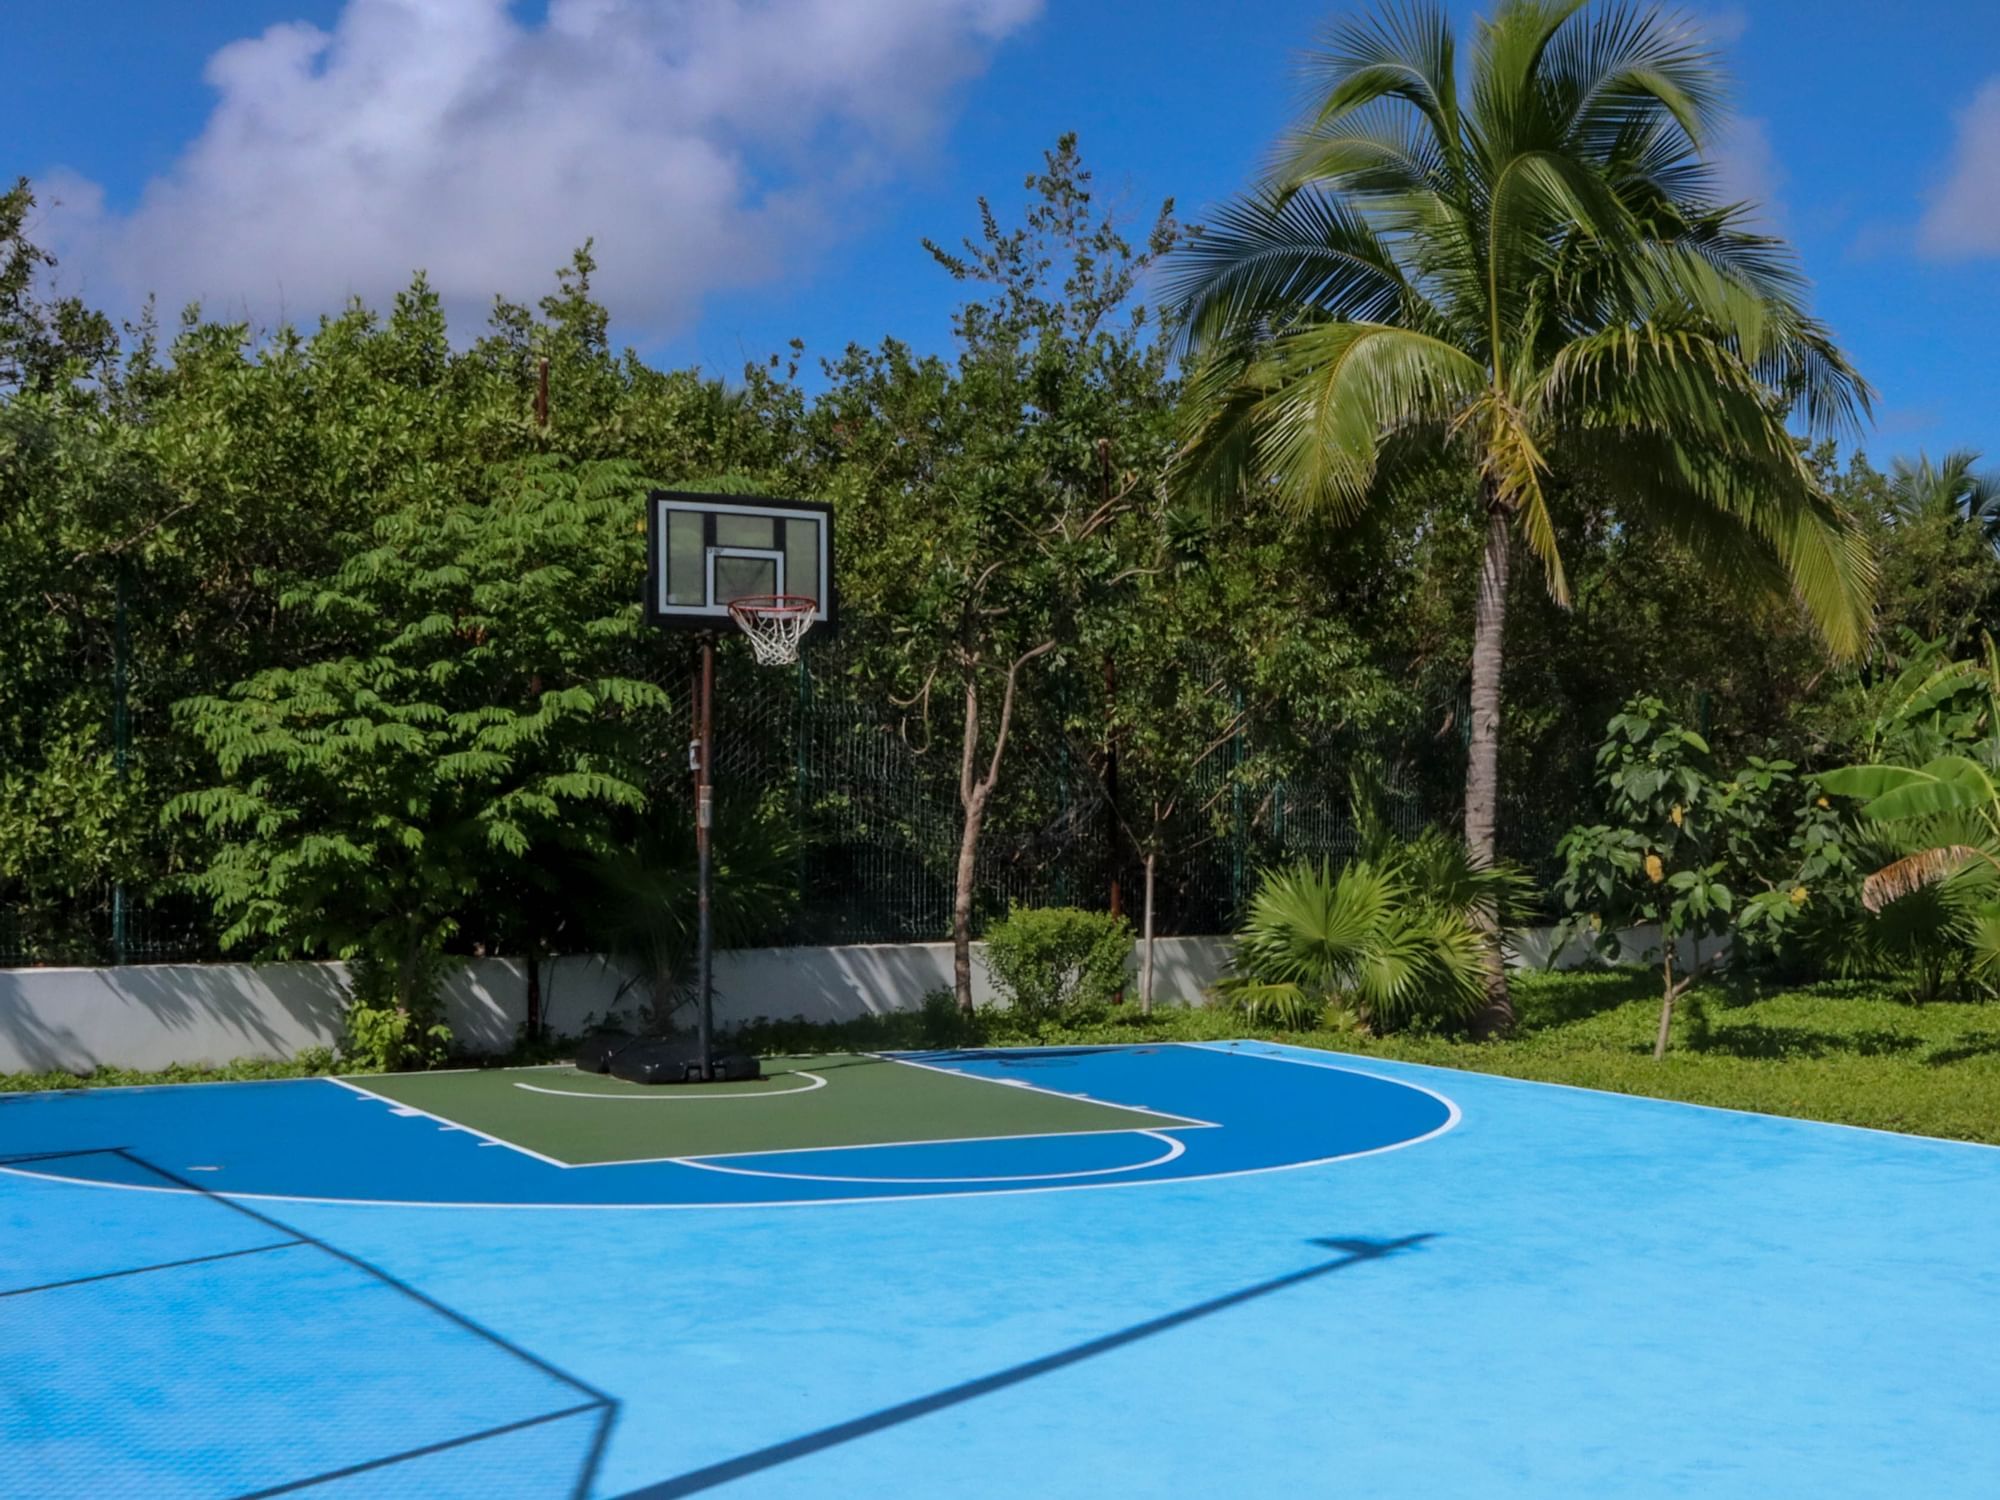 Close-up on the basketball court at Haven Riviera Cancun